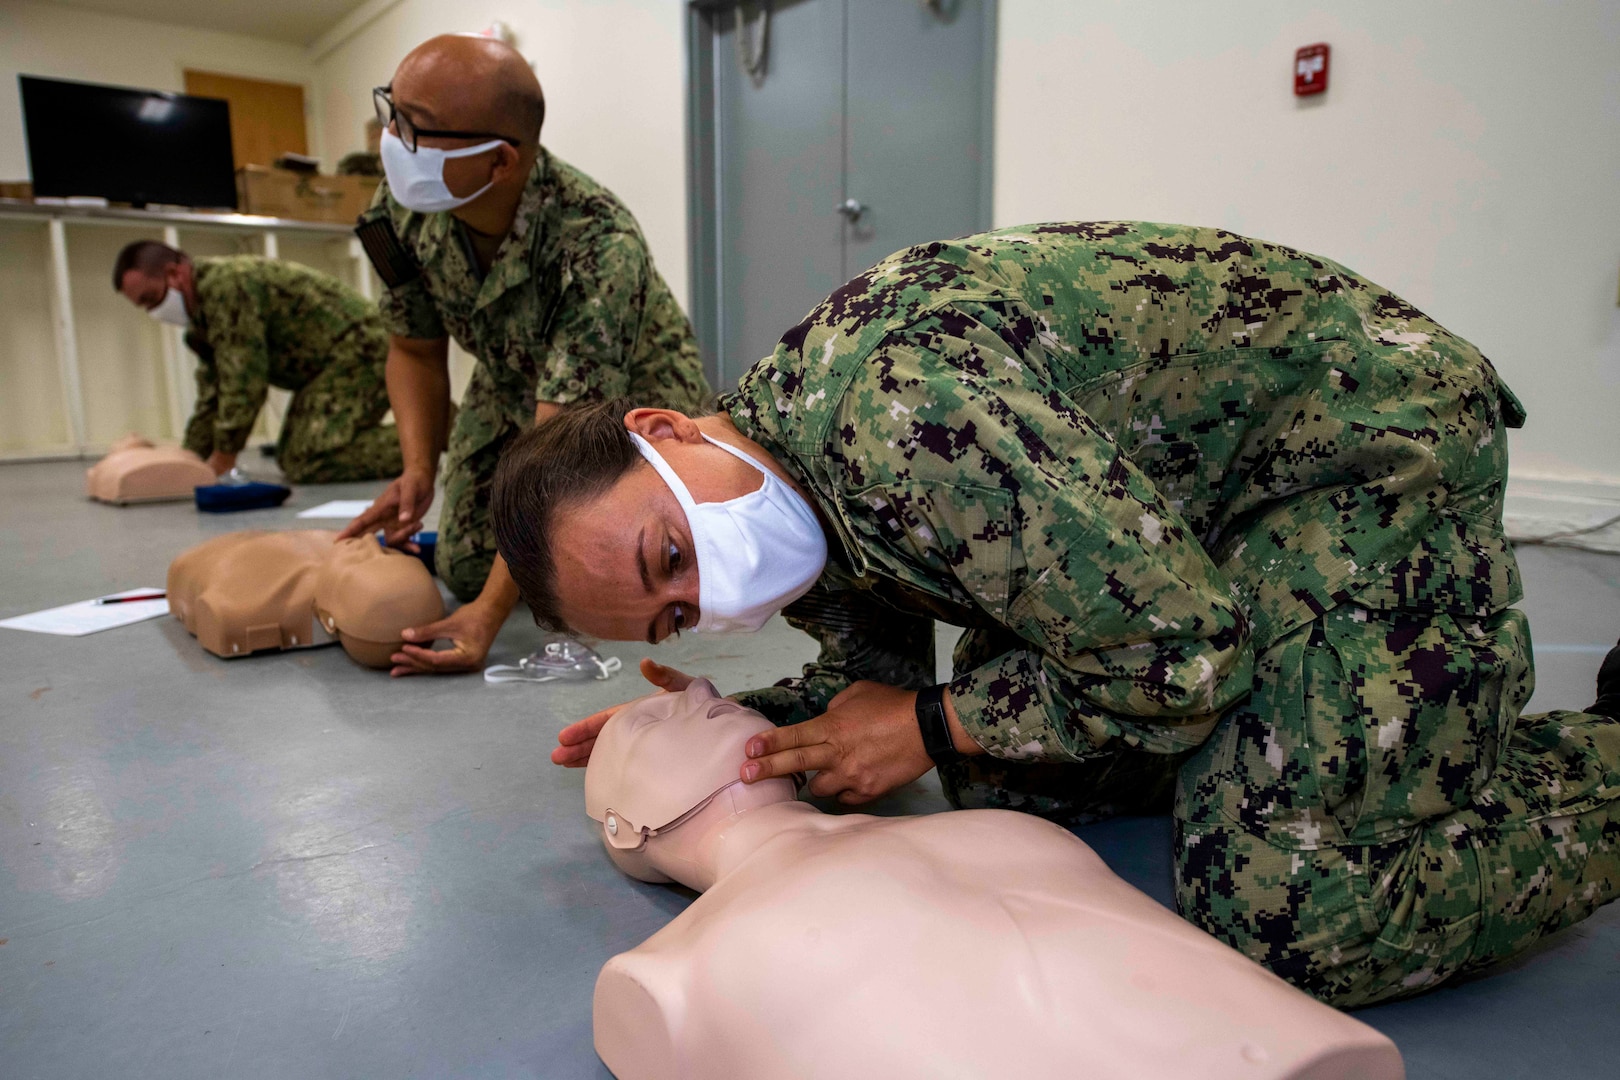 Petty Officer 3rd Class Mallory Tittle participates in CPR training prior to new recruit arrivals on board Fort McCoy, a U.S. Army training center in western Wisconsin.